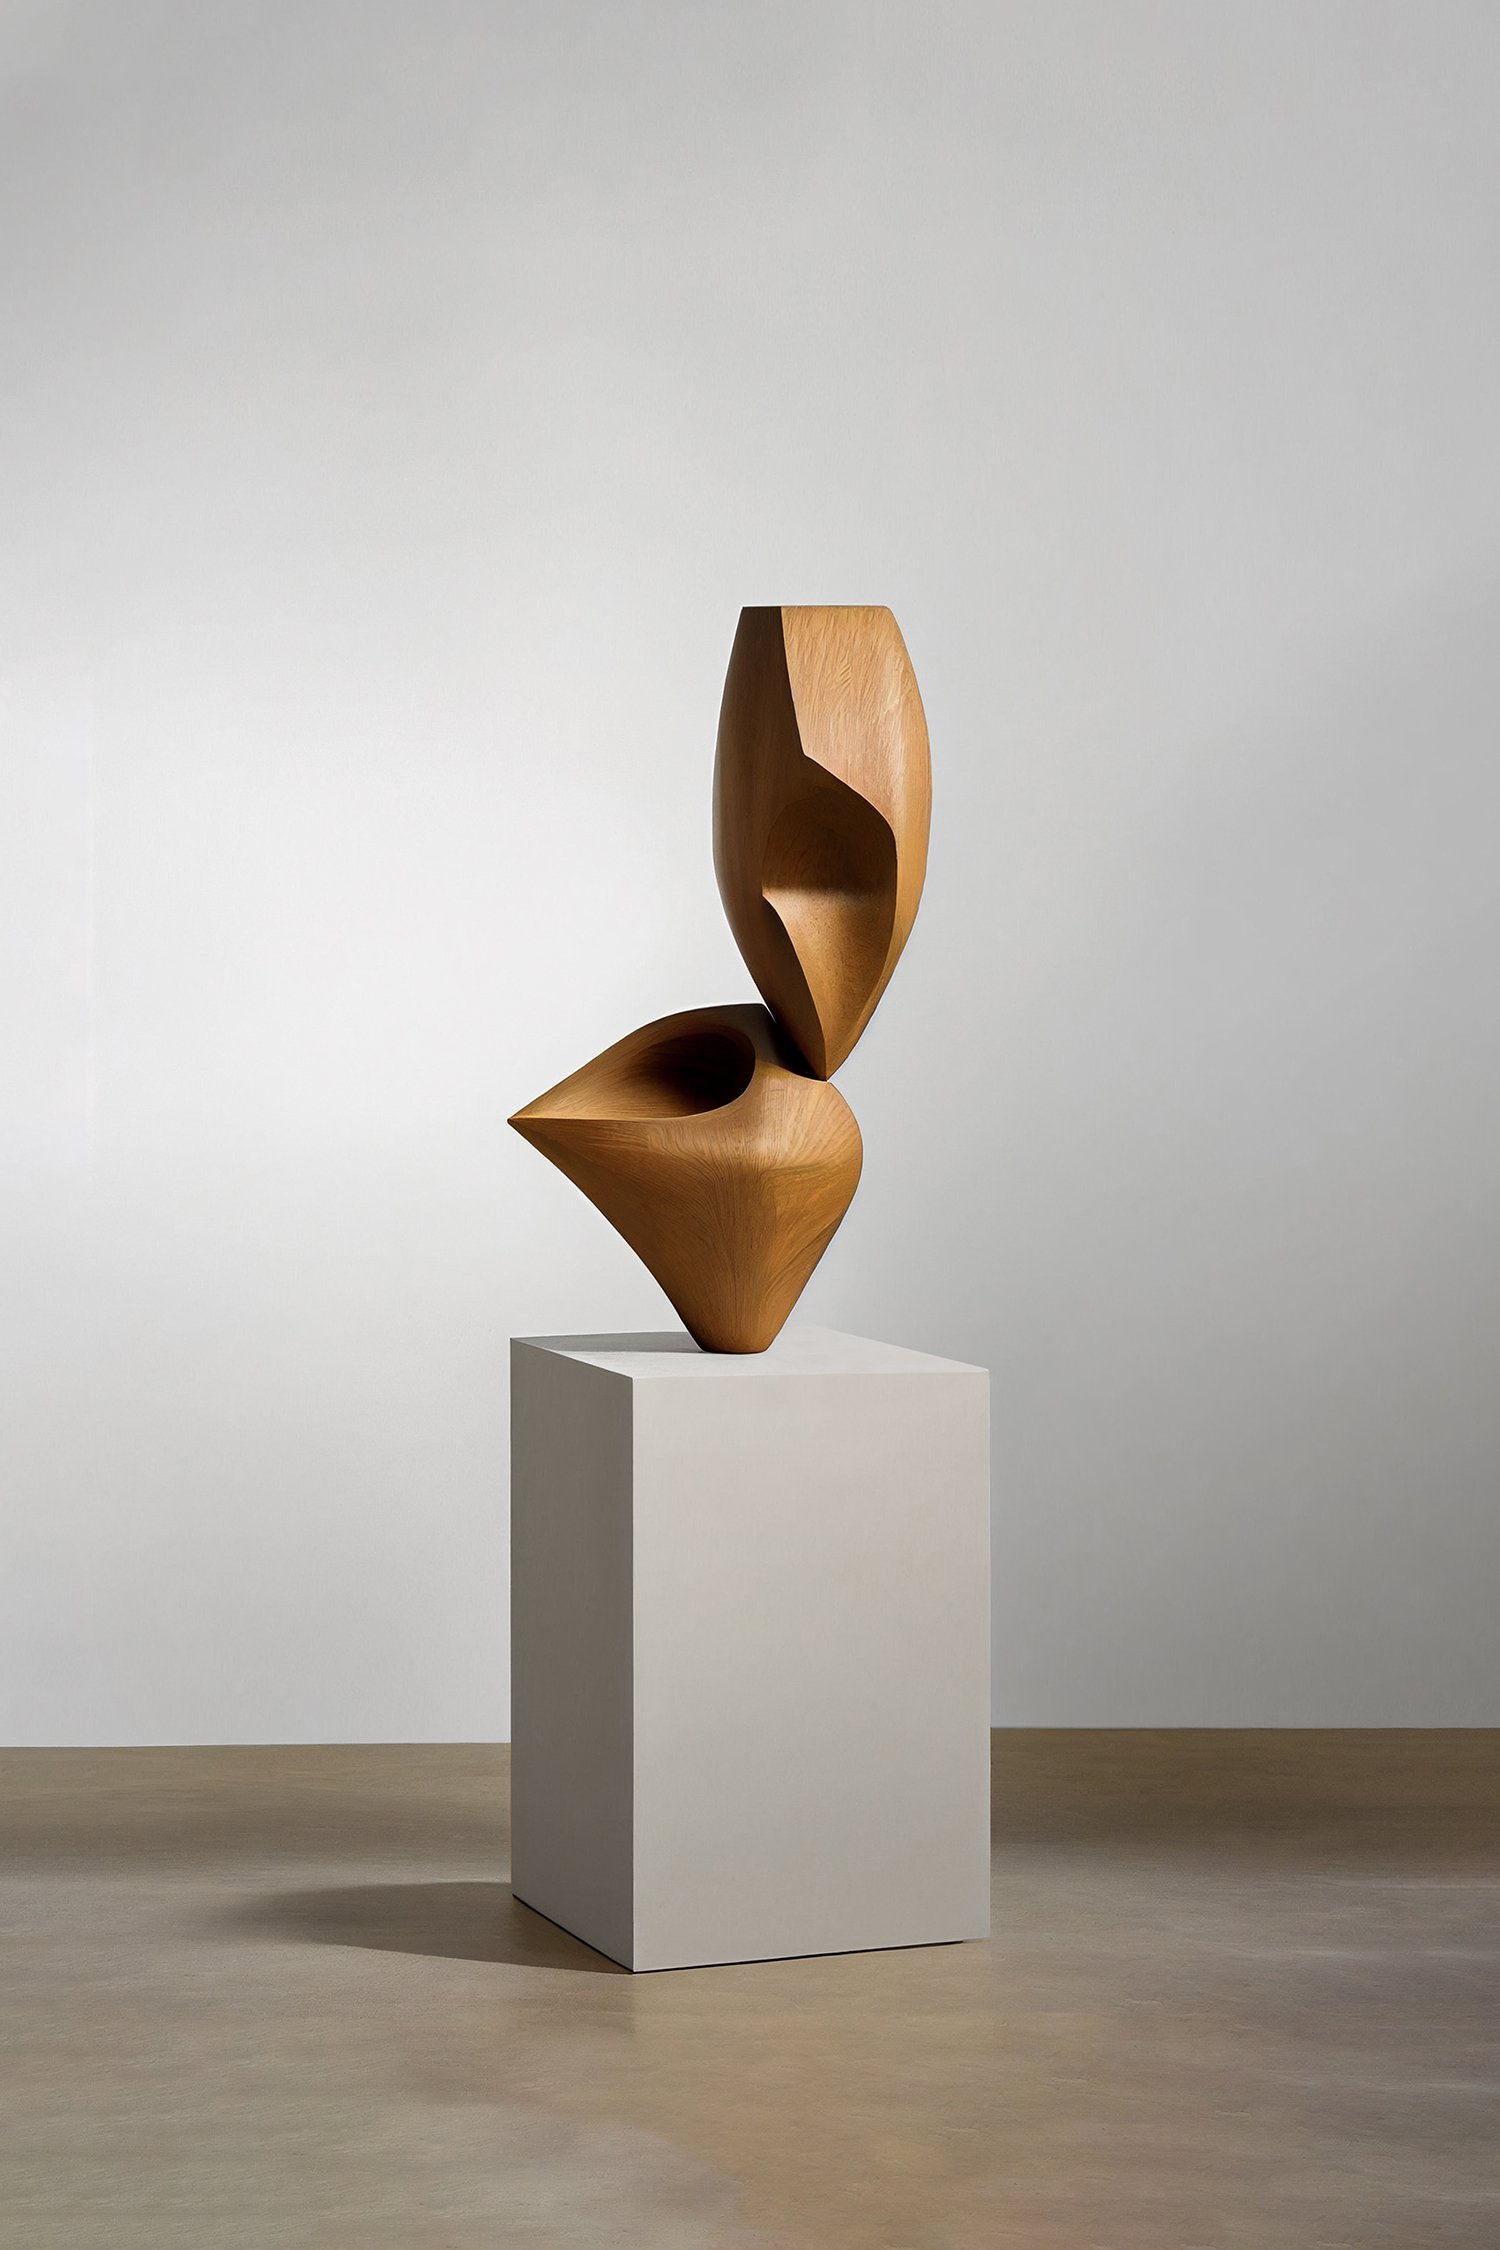 Biomorphic Carved Wood Sculpture in the style of Isamu Noguchi